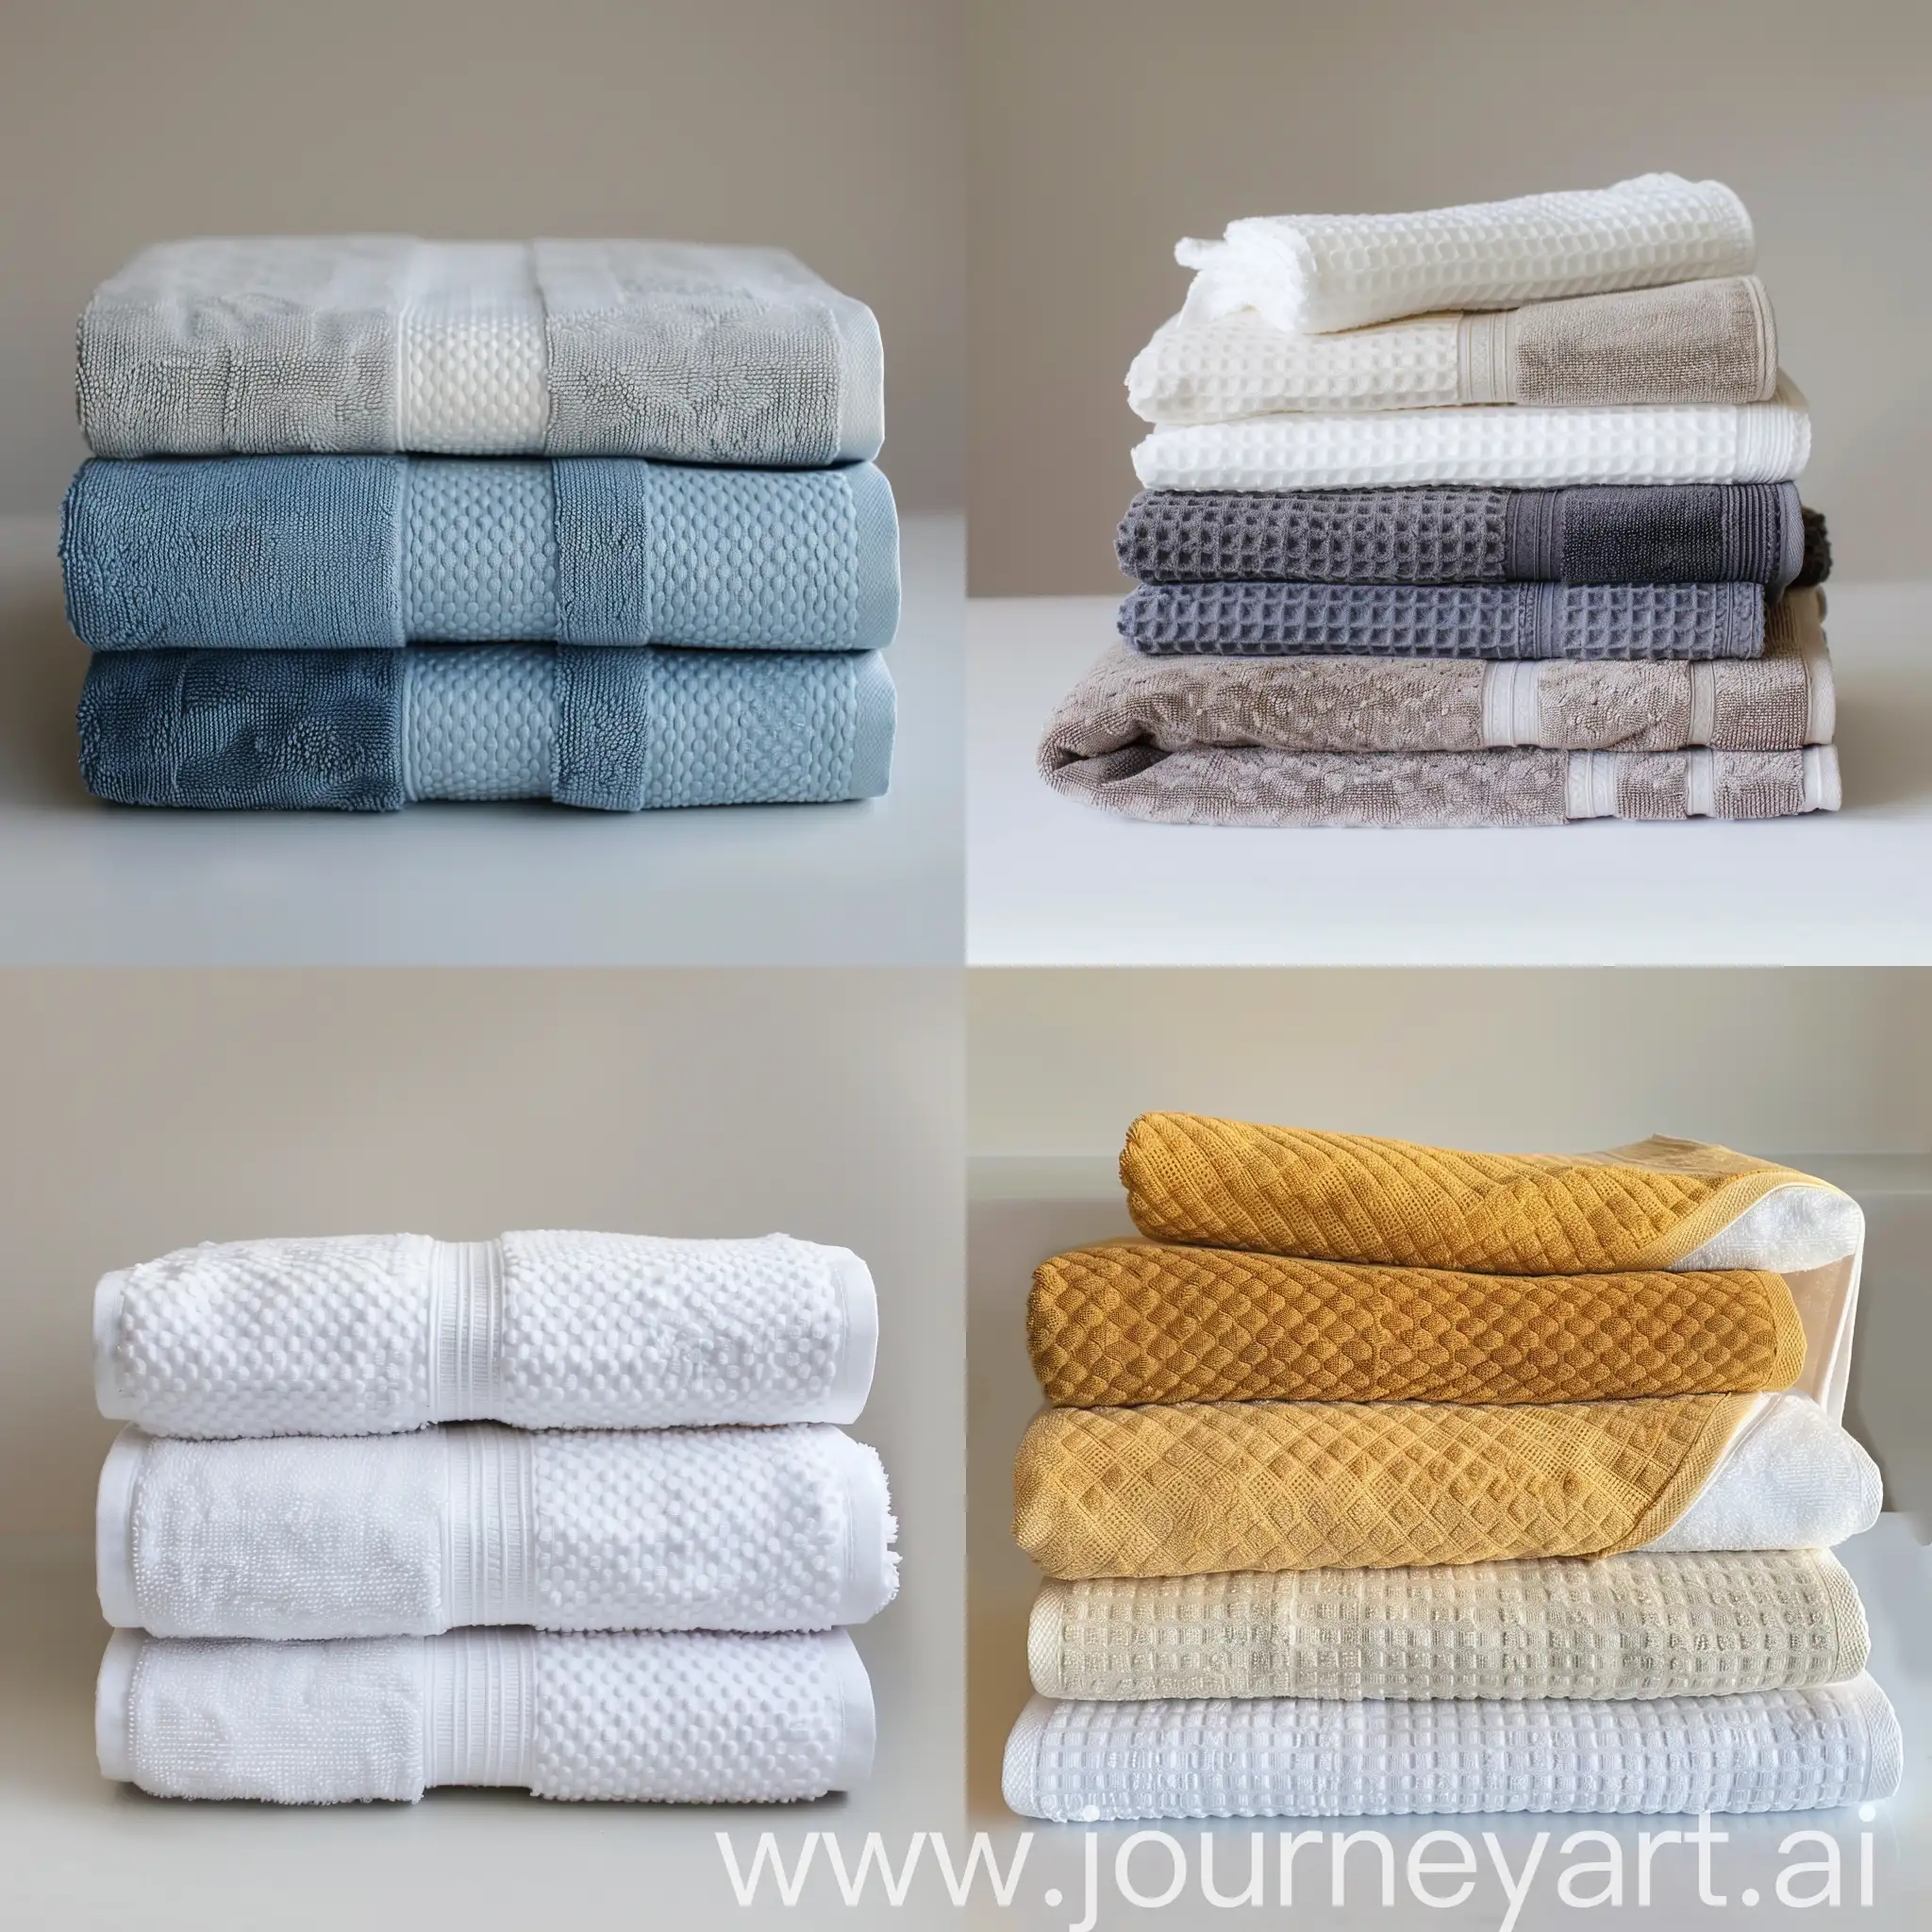 Luxurious-Waffle-Bath-Towel-for-Sale-Elegant-and-Absorbent-Bathroom-Linens